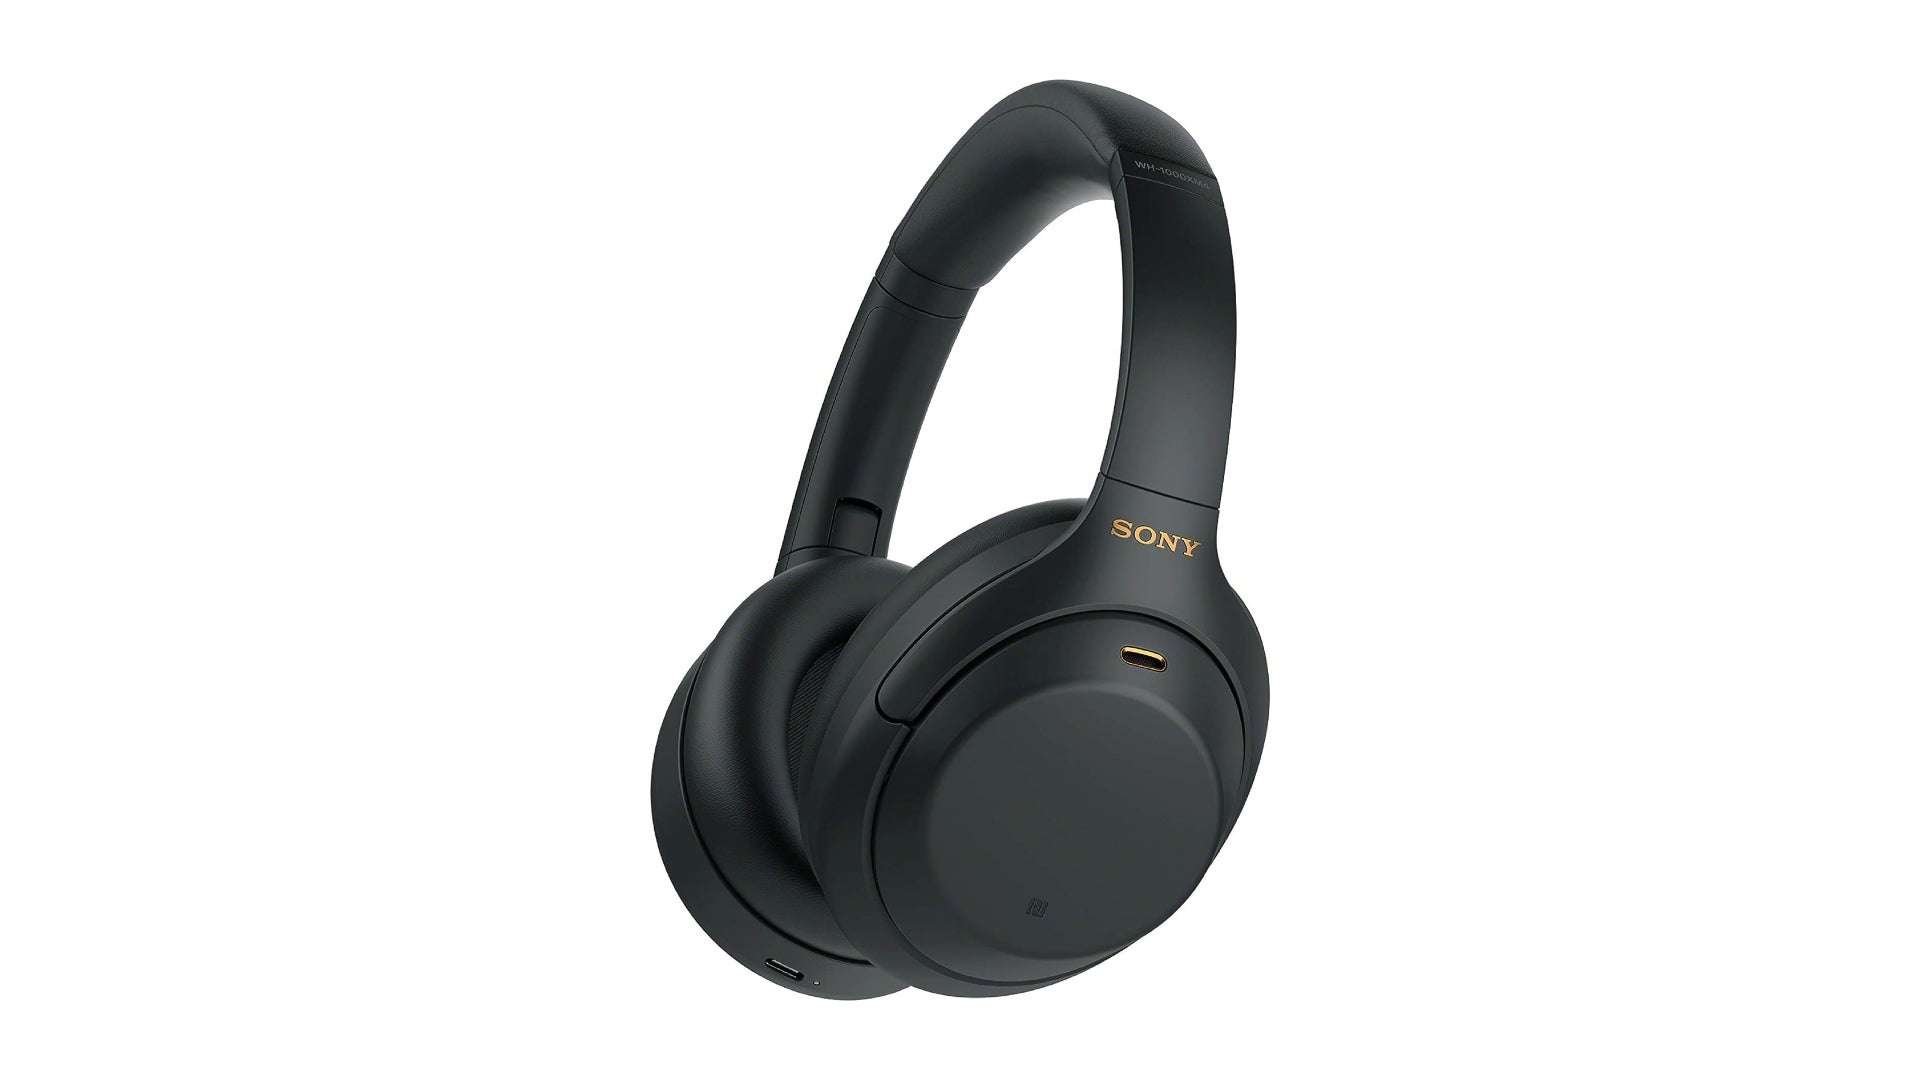 Save 13% on Sony WH-1000XM4 wireless headphones in this early